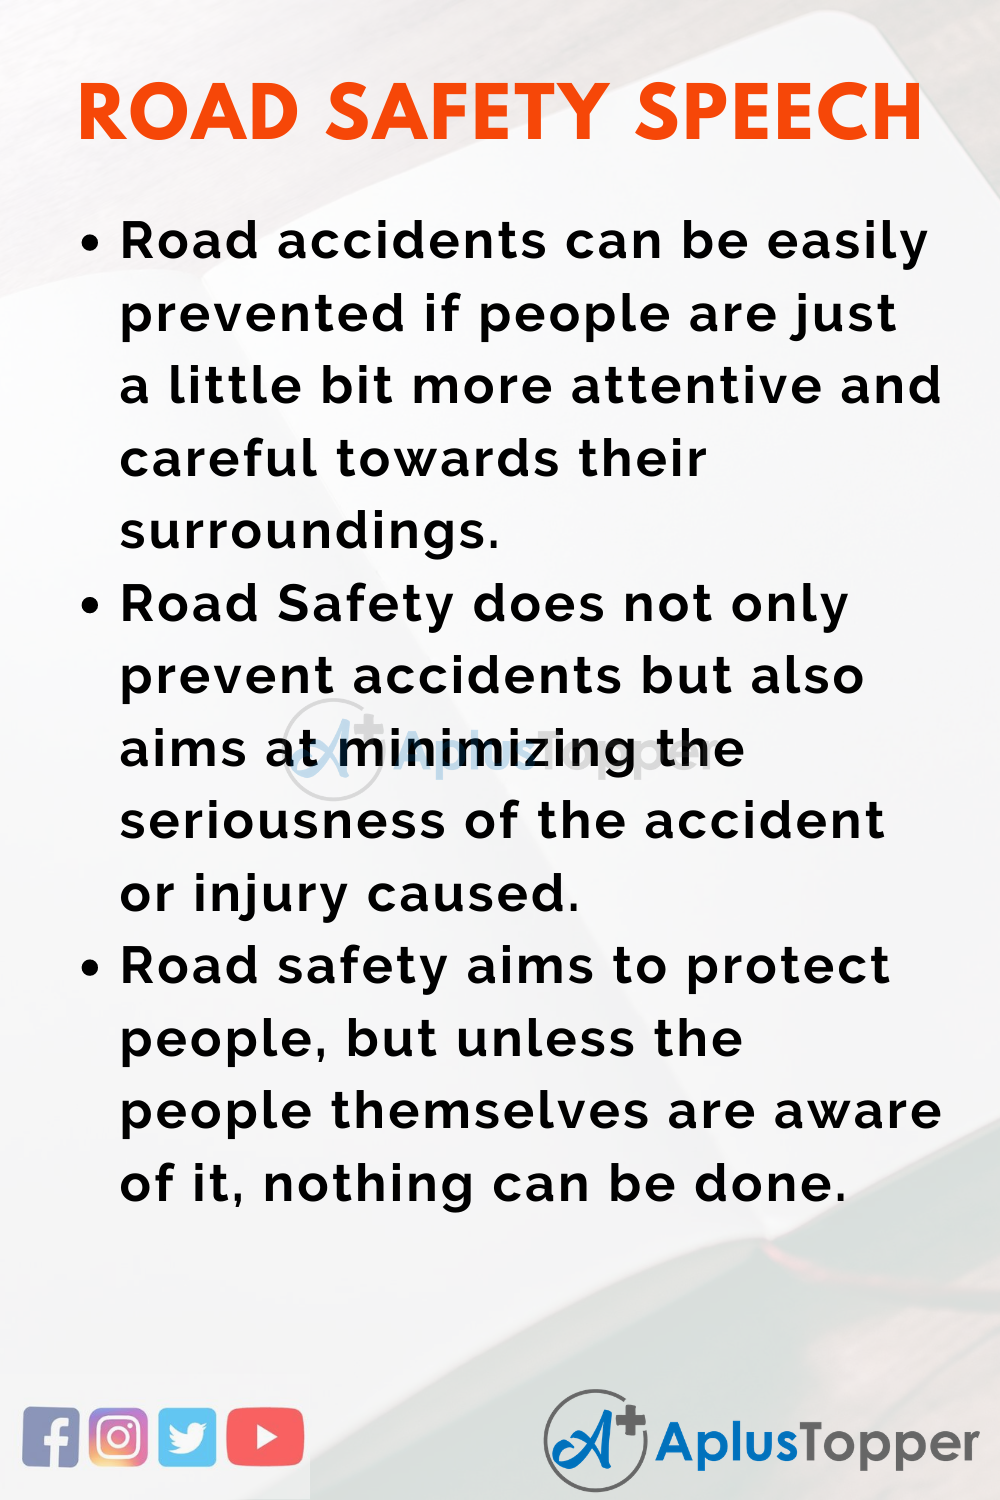 speech on road safety in 150 words